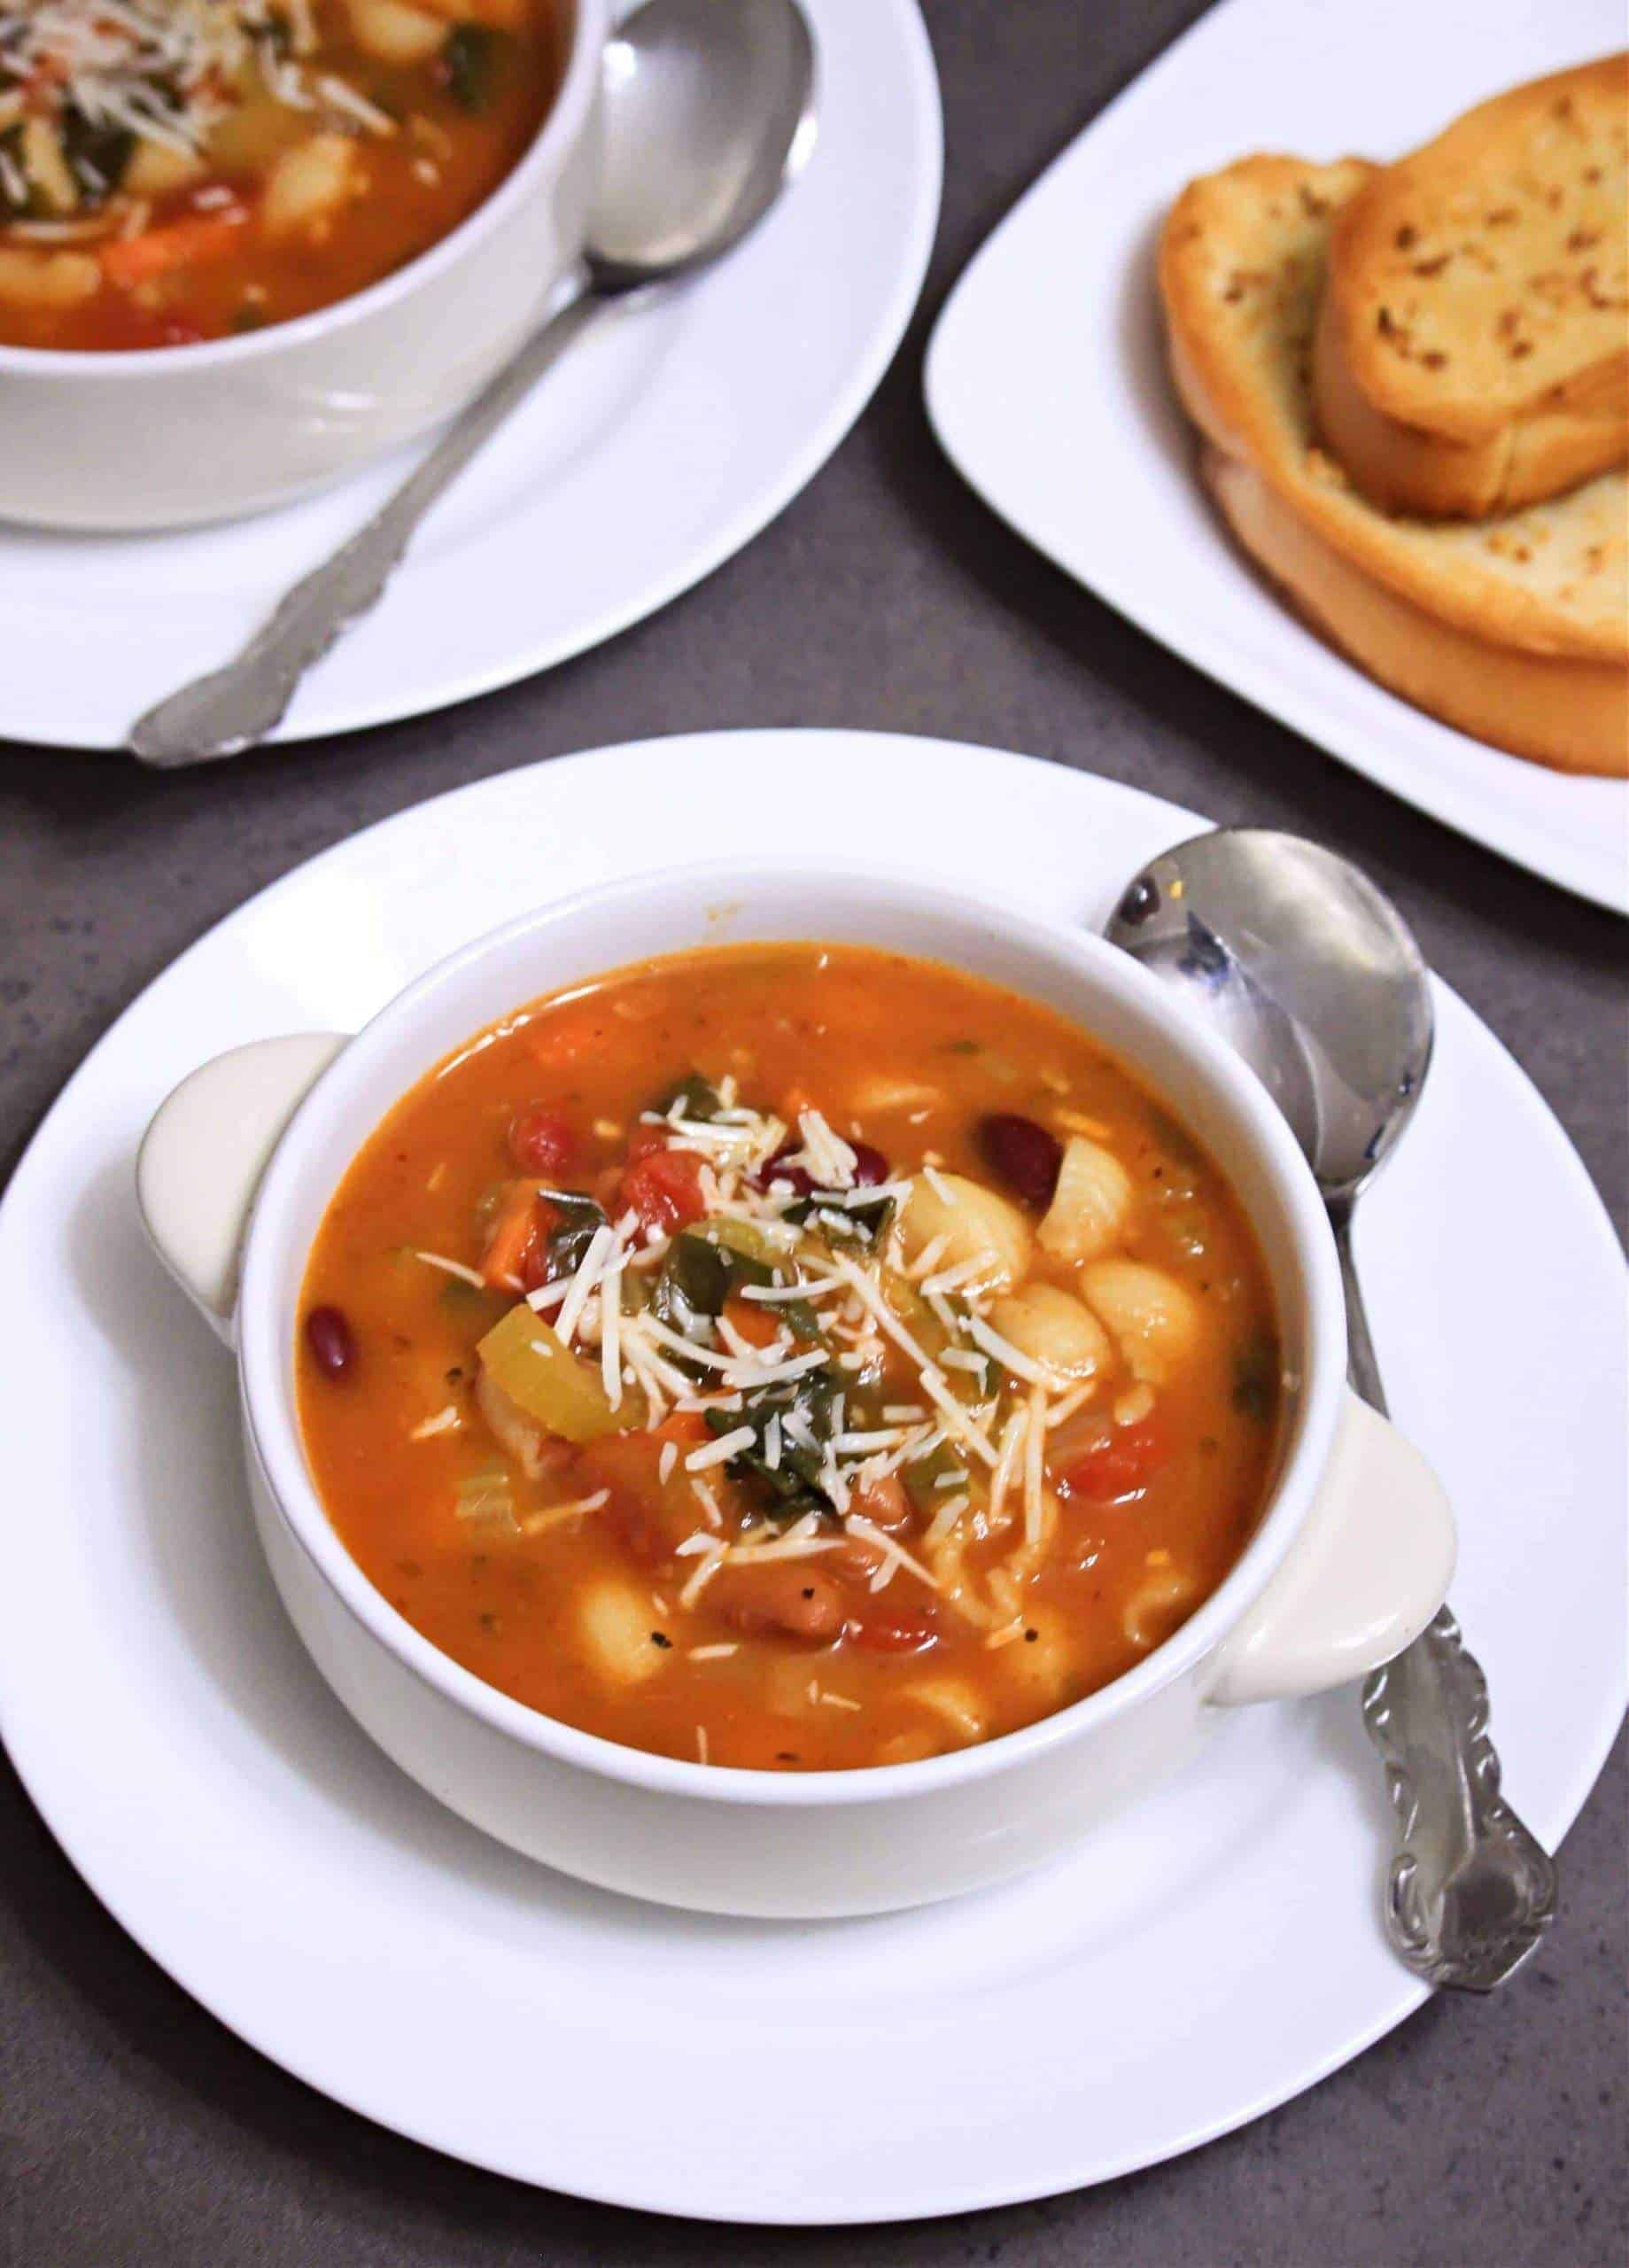 Instant Pot Vegetarian Minestrone Soup My Cooking Journey